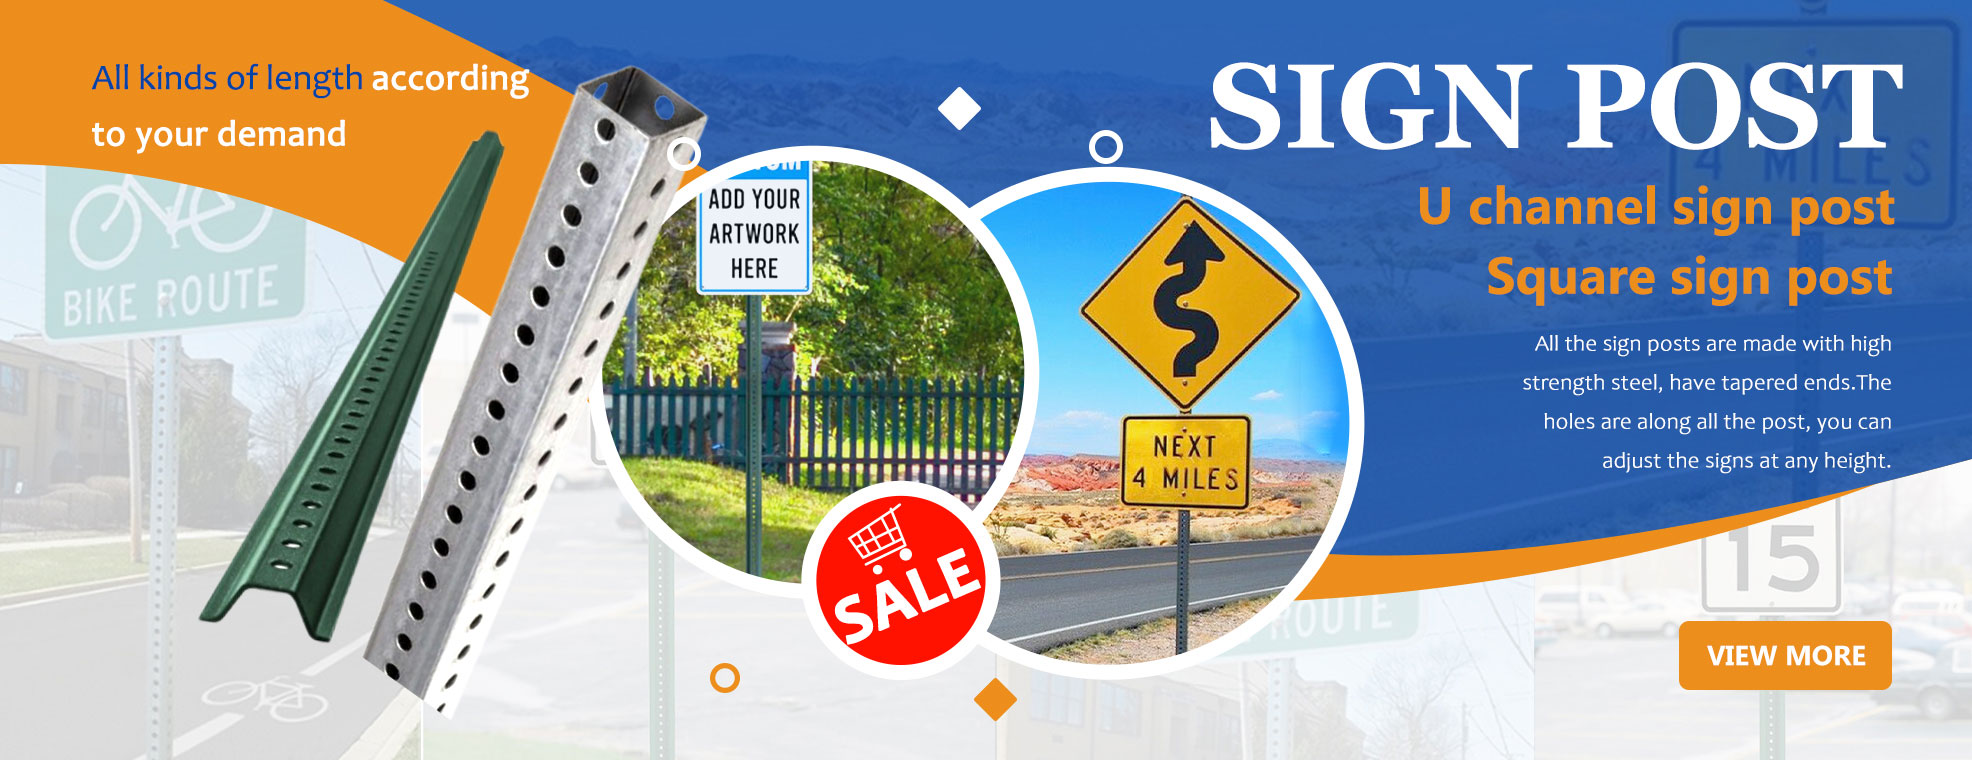 sign post manufacture